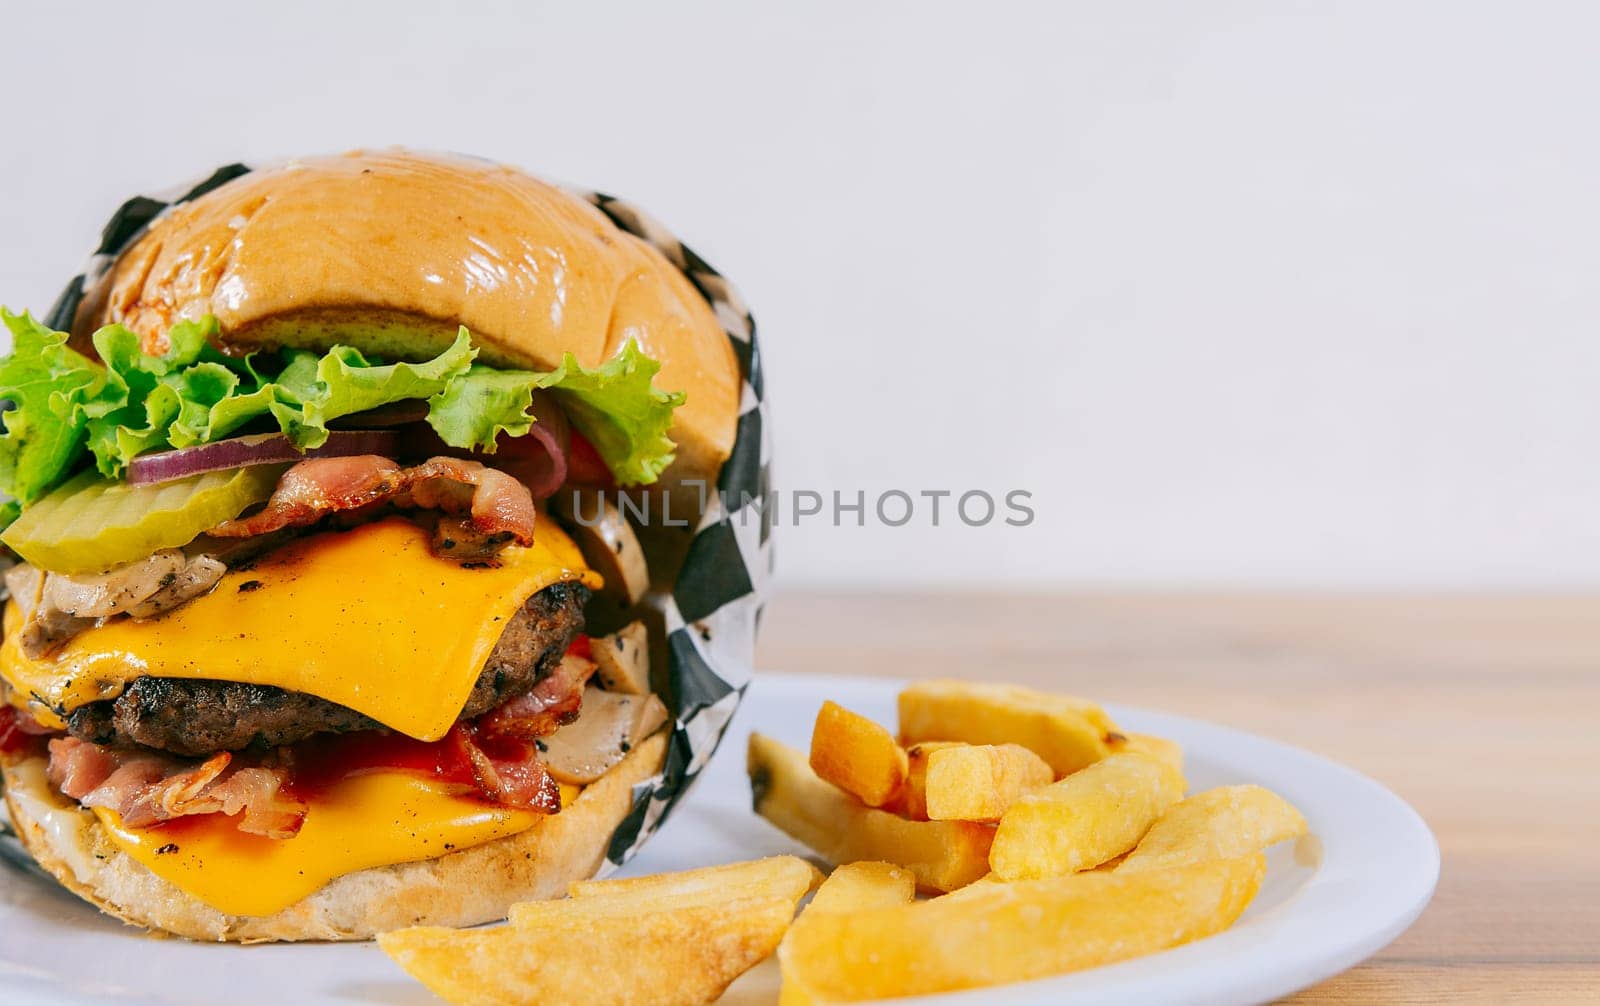 Homemade burger with french fries on a plate on wooden table. Big cheeseburger with fries served with copy space